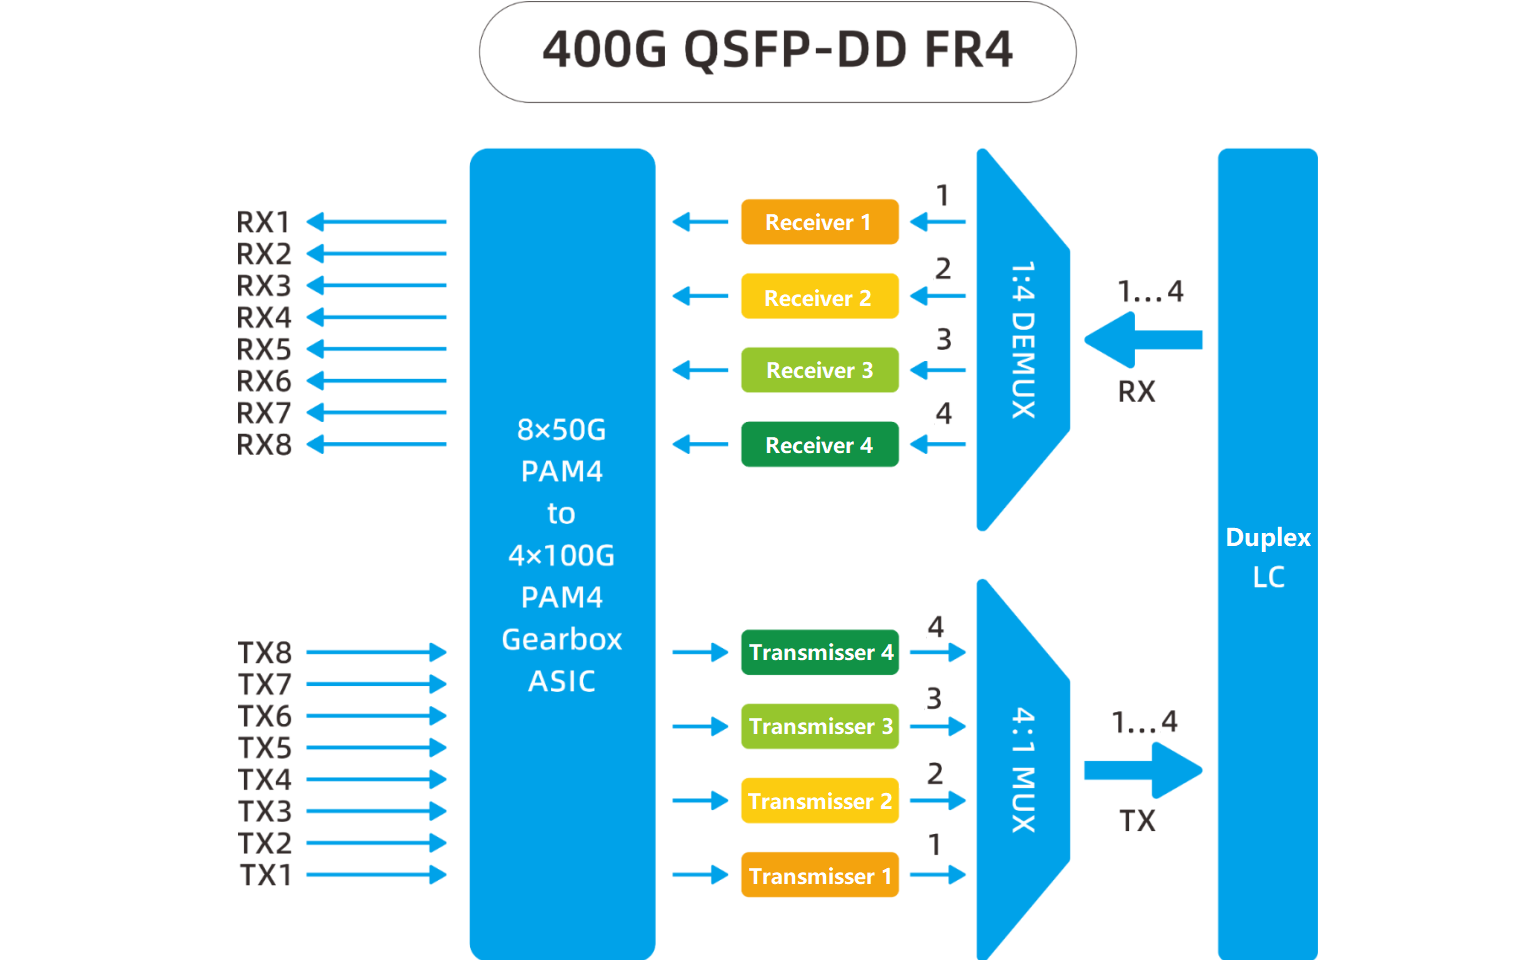 The optical interface side of FR4 uses four channels of 106Gbps PAM4 modulation